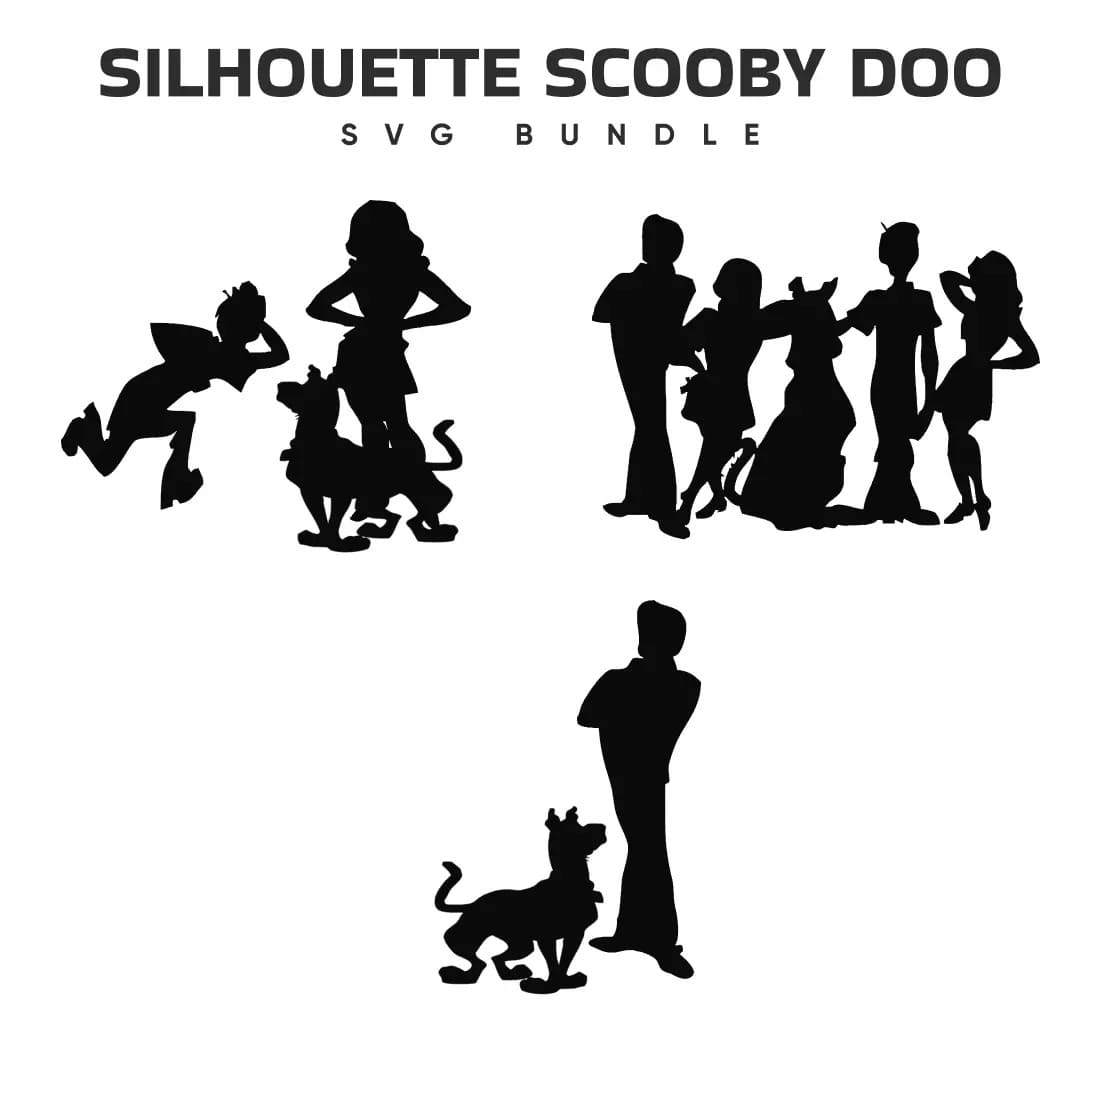 Silhouette Scooby Doo SVG Bundle Preview.